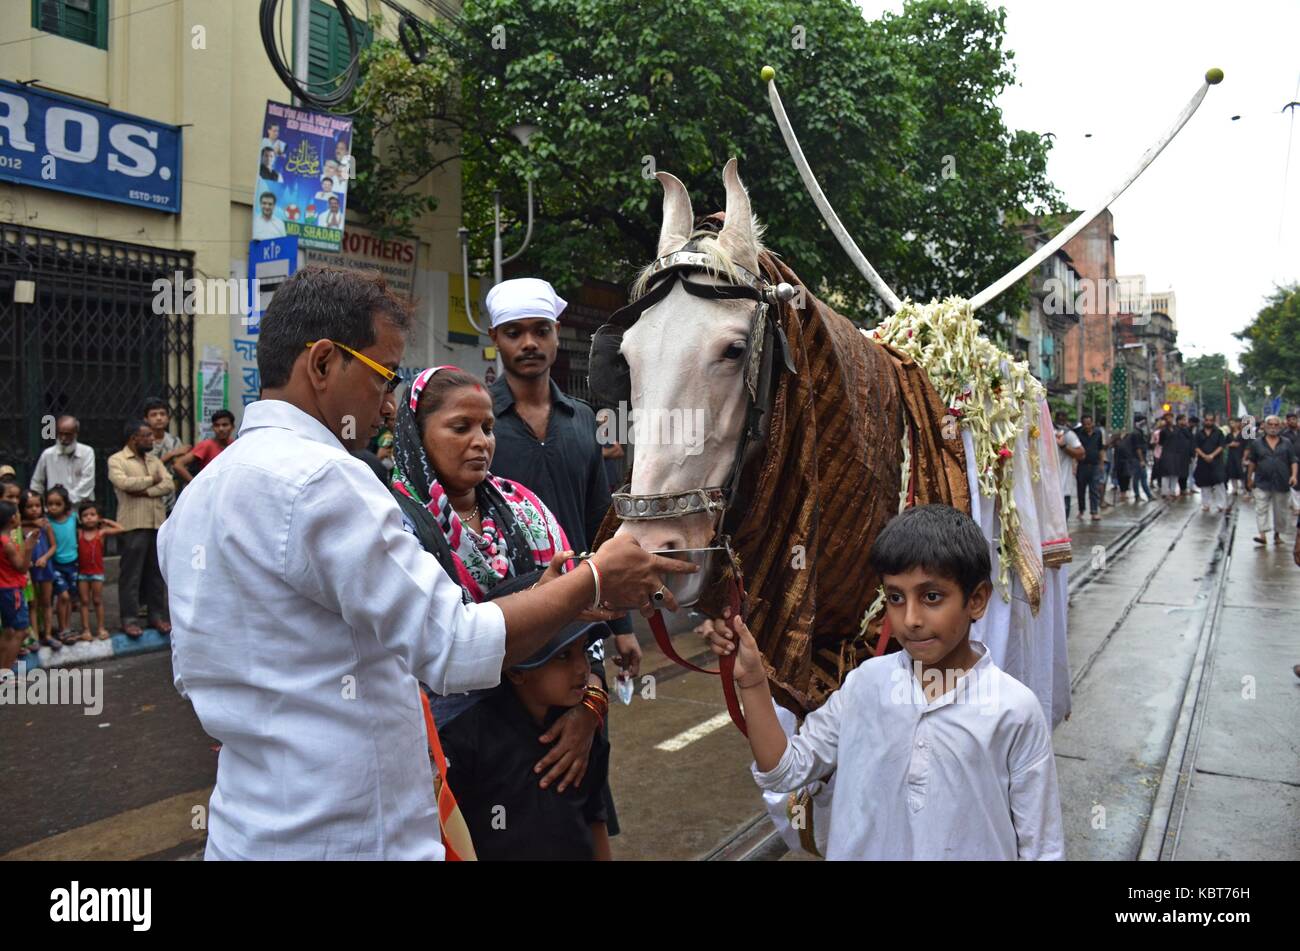 Kolkata,India 30th September,17.Shia muslim people are performing different activities during Muharram in respect of Hussain Ali who was martyred in the Battle of Karbala.They are feeding the horse in between the procession. Credit : Dipayan Bose/Alamy live news Stock Photo